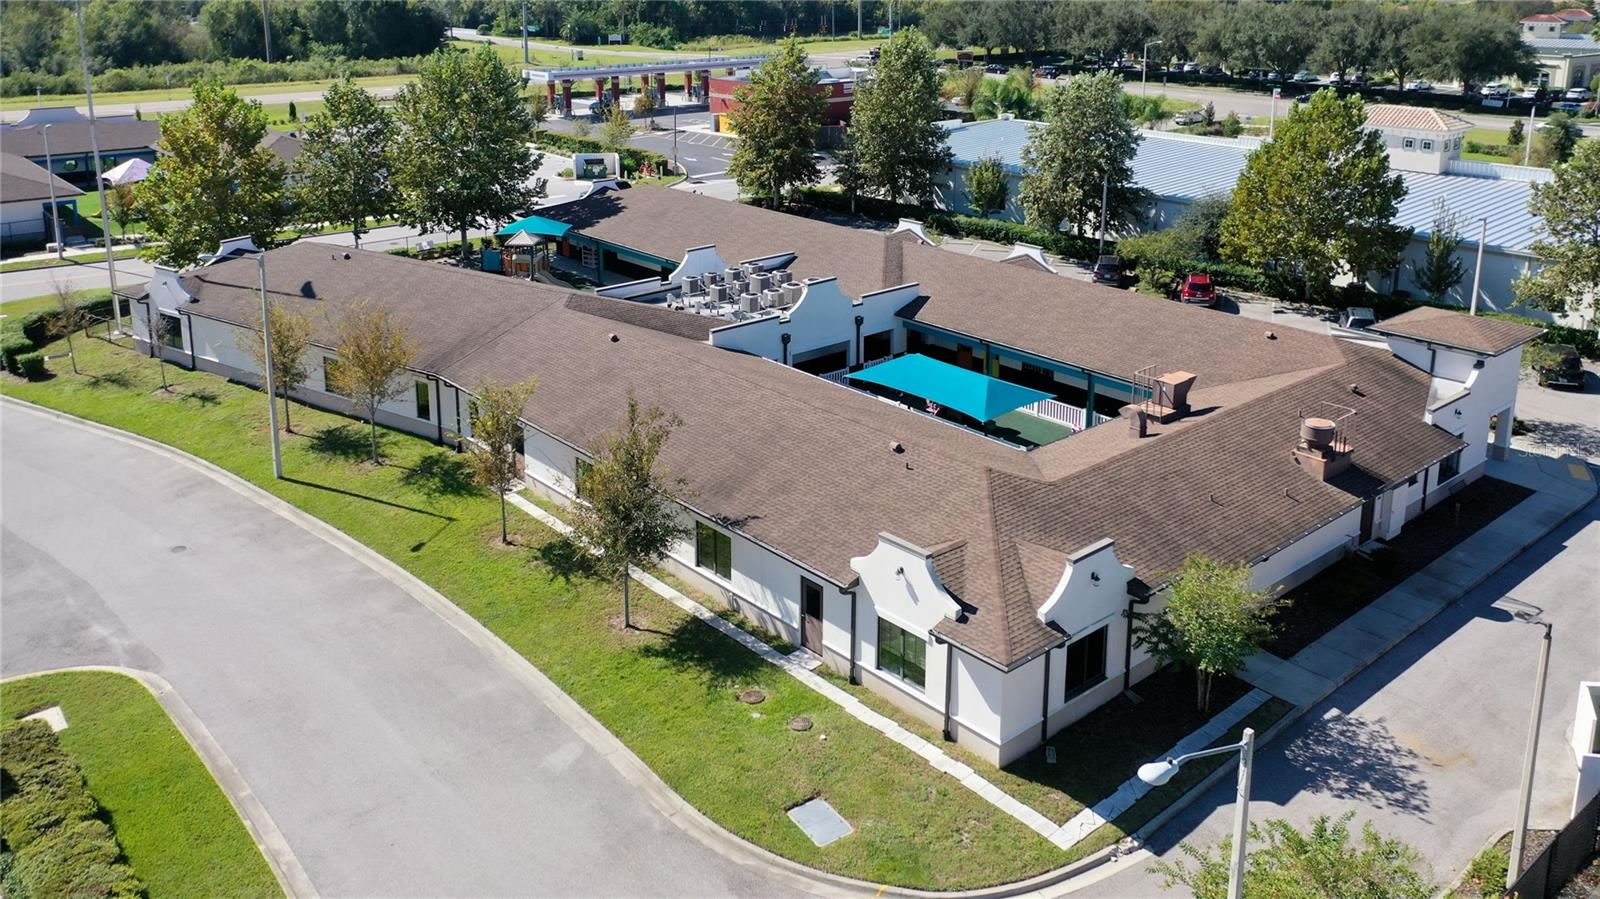 Early Education Learning Center For Sale in New Port Richey, FL - 13,800 sq ft $4,500,000